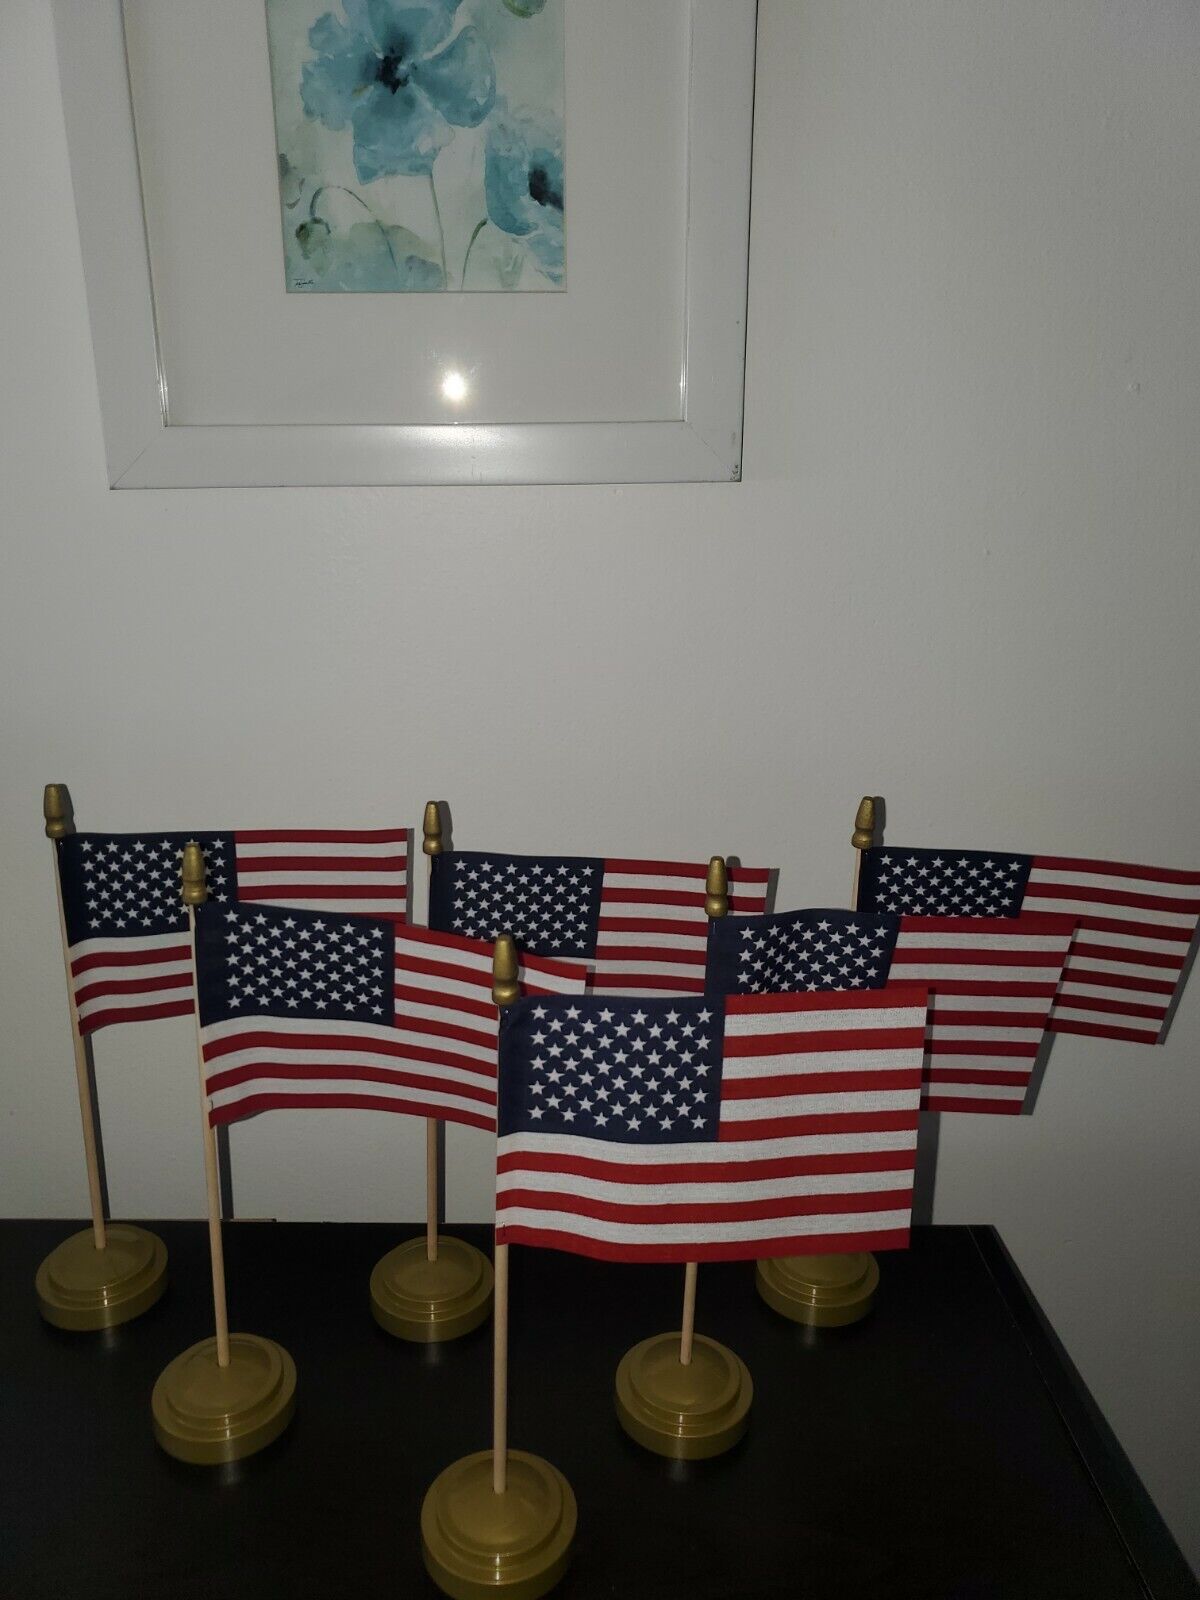 USA 4x6 In. American Flags ( Made In USA) - 6 Pack w/ Gold Stands